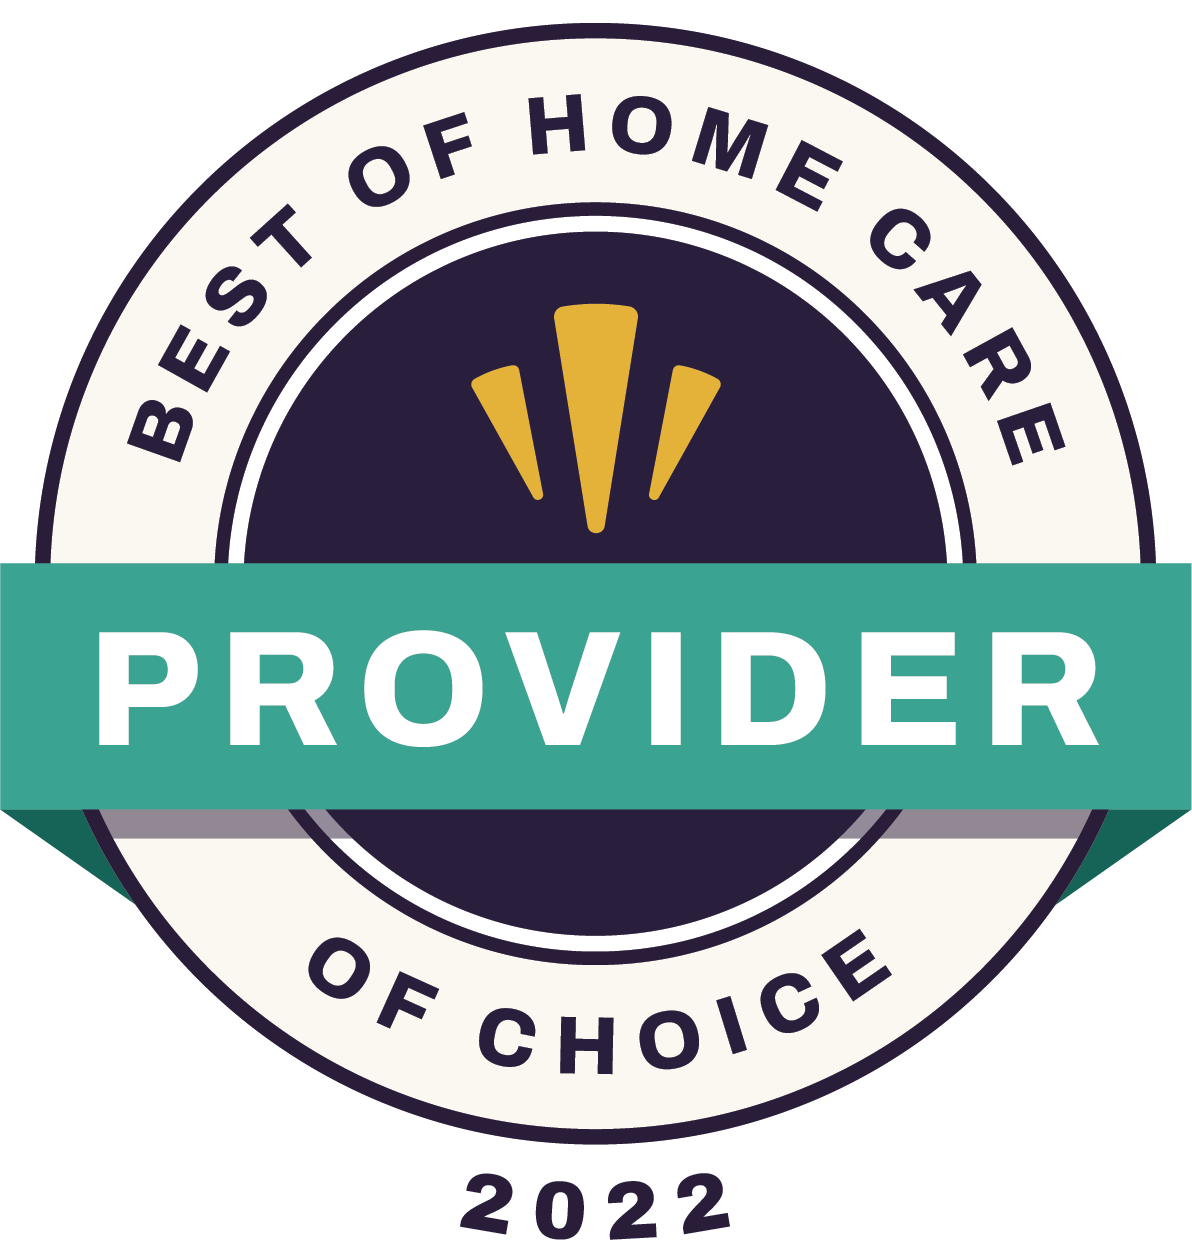 Best of Home Care 2022 Provider of Choice